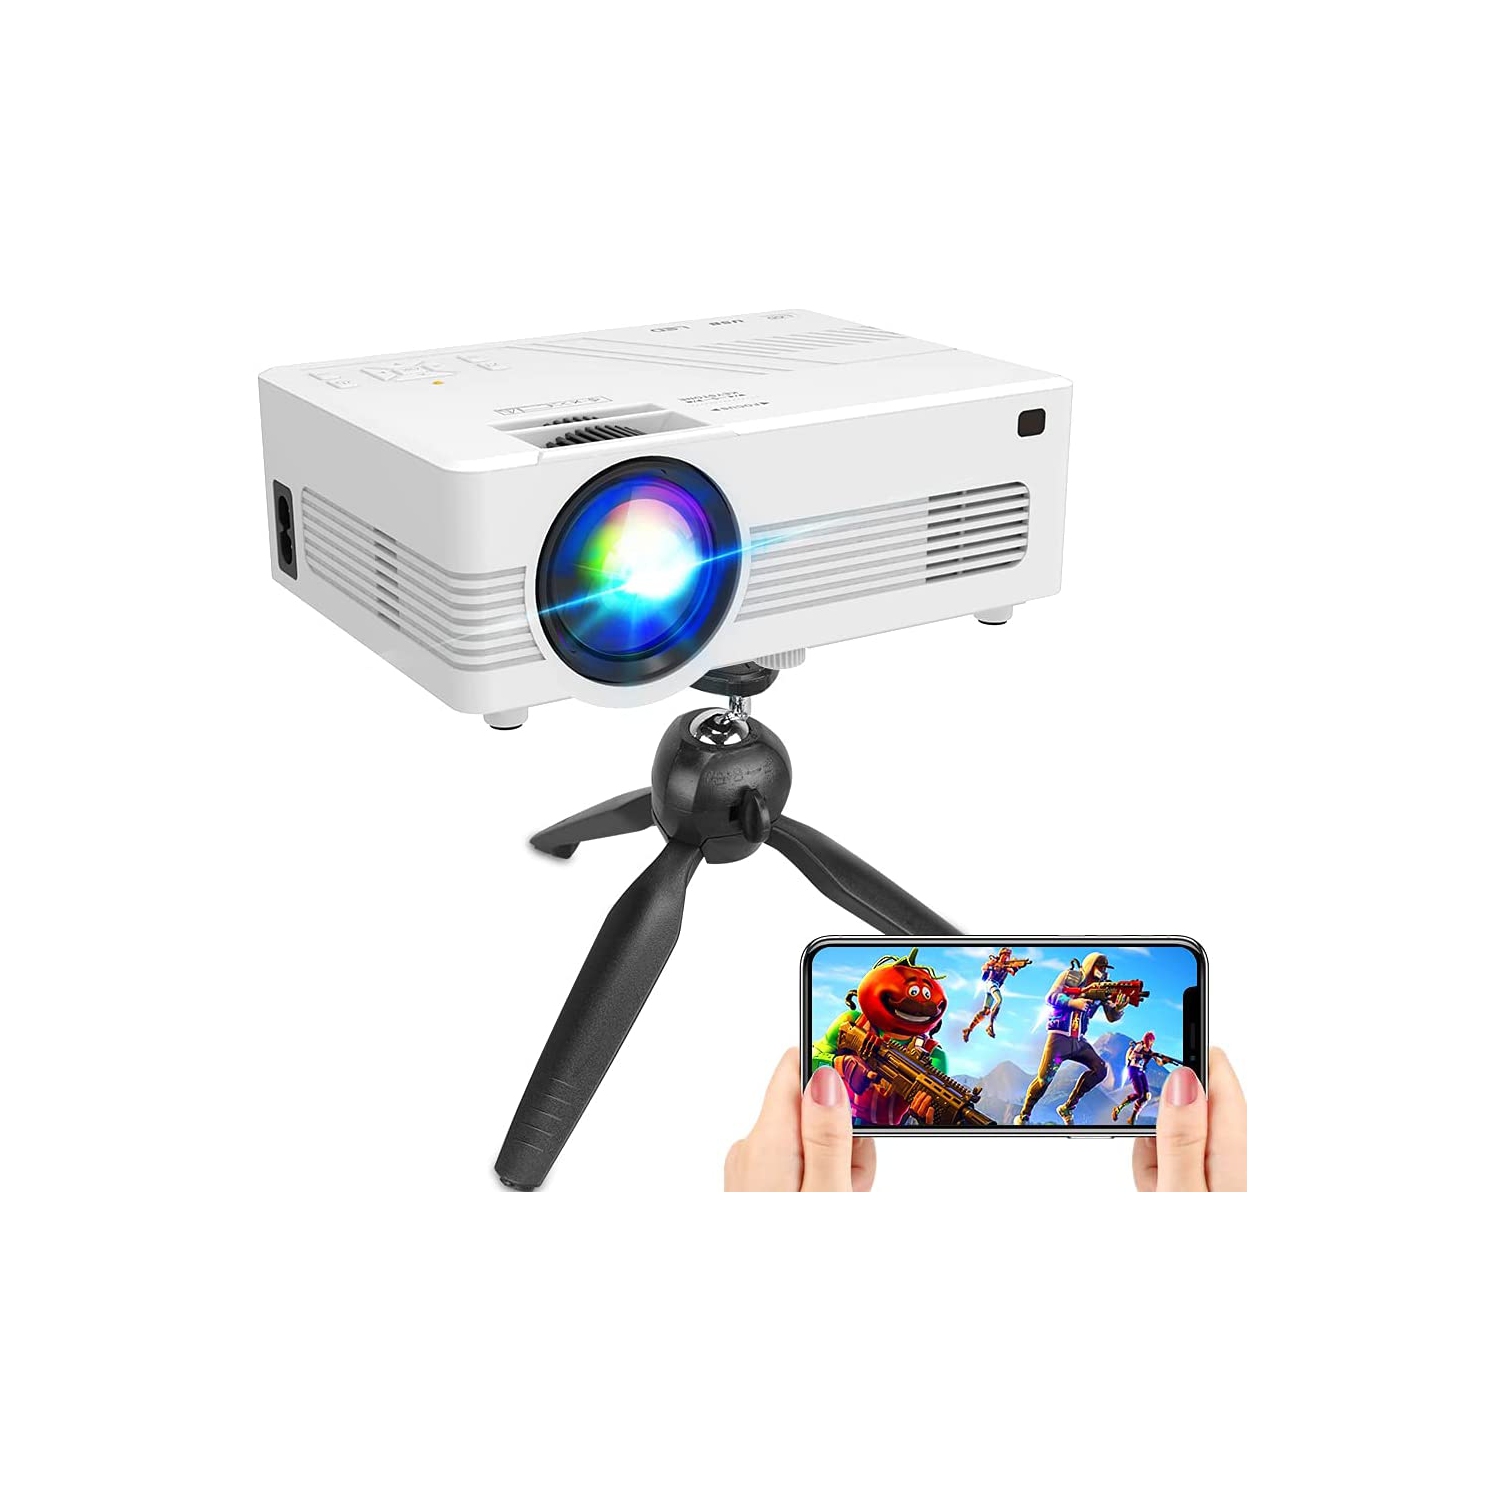 Eokeiy Full HD 1080P Supported WiFi Projector, 7500Lumens Video Projector with Tripod - Open Box